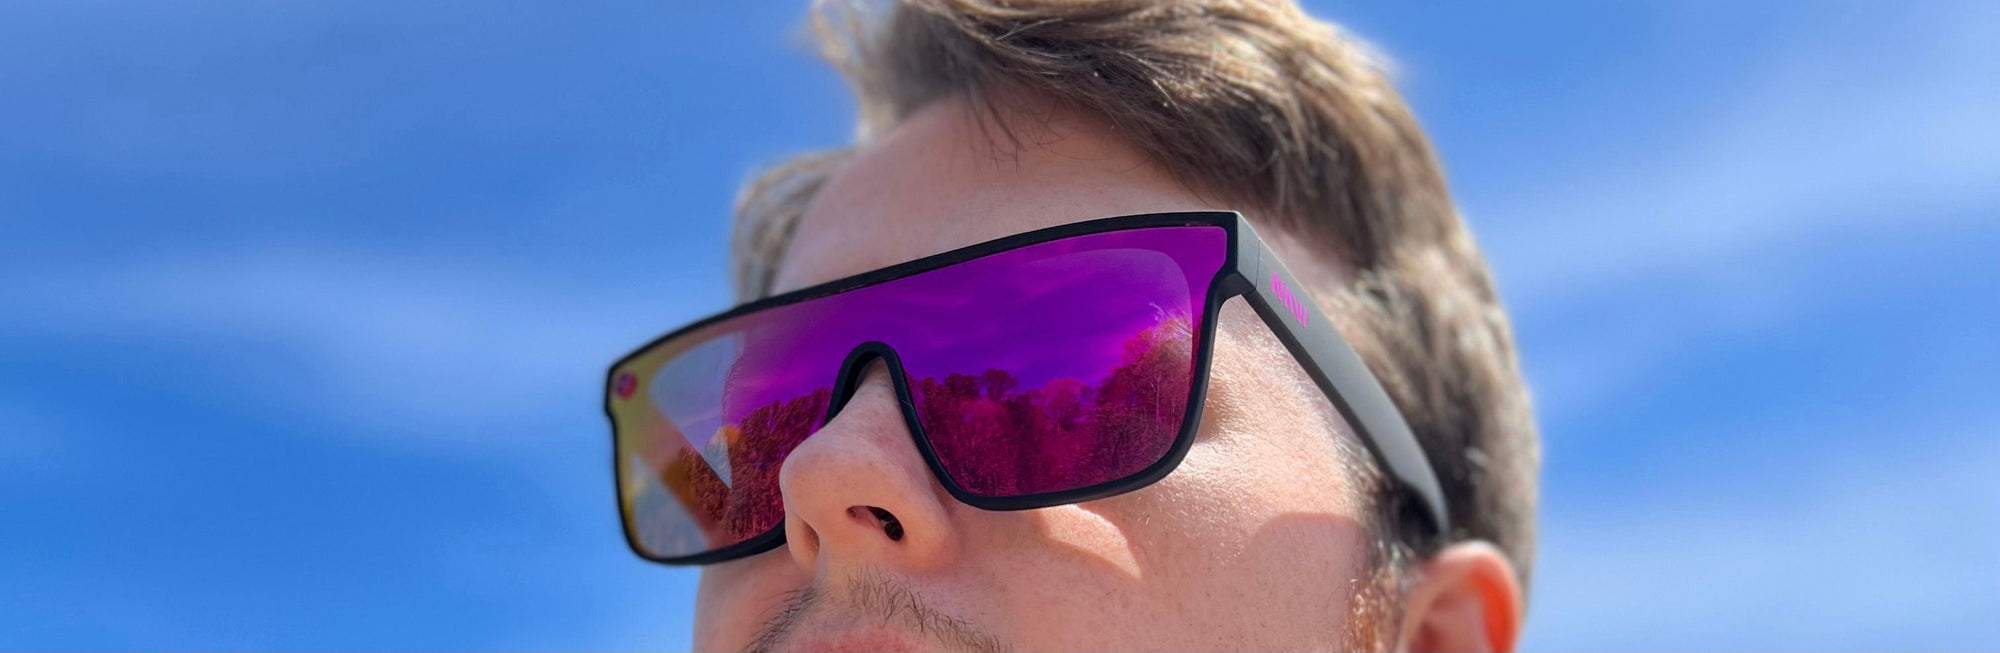 Sunglasses for Boating: Polarized Lenses and Other Essential Features